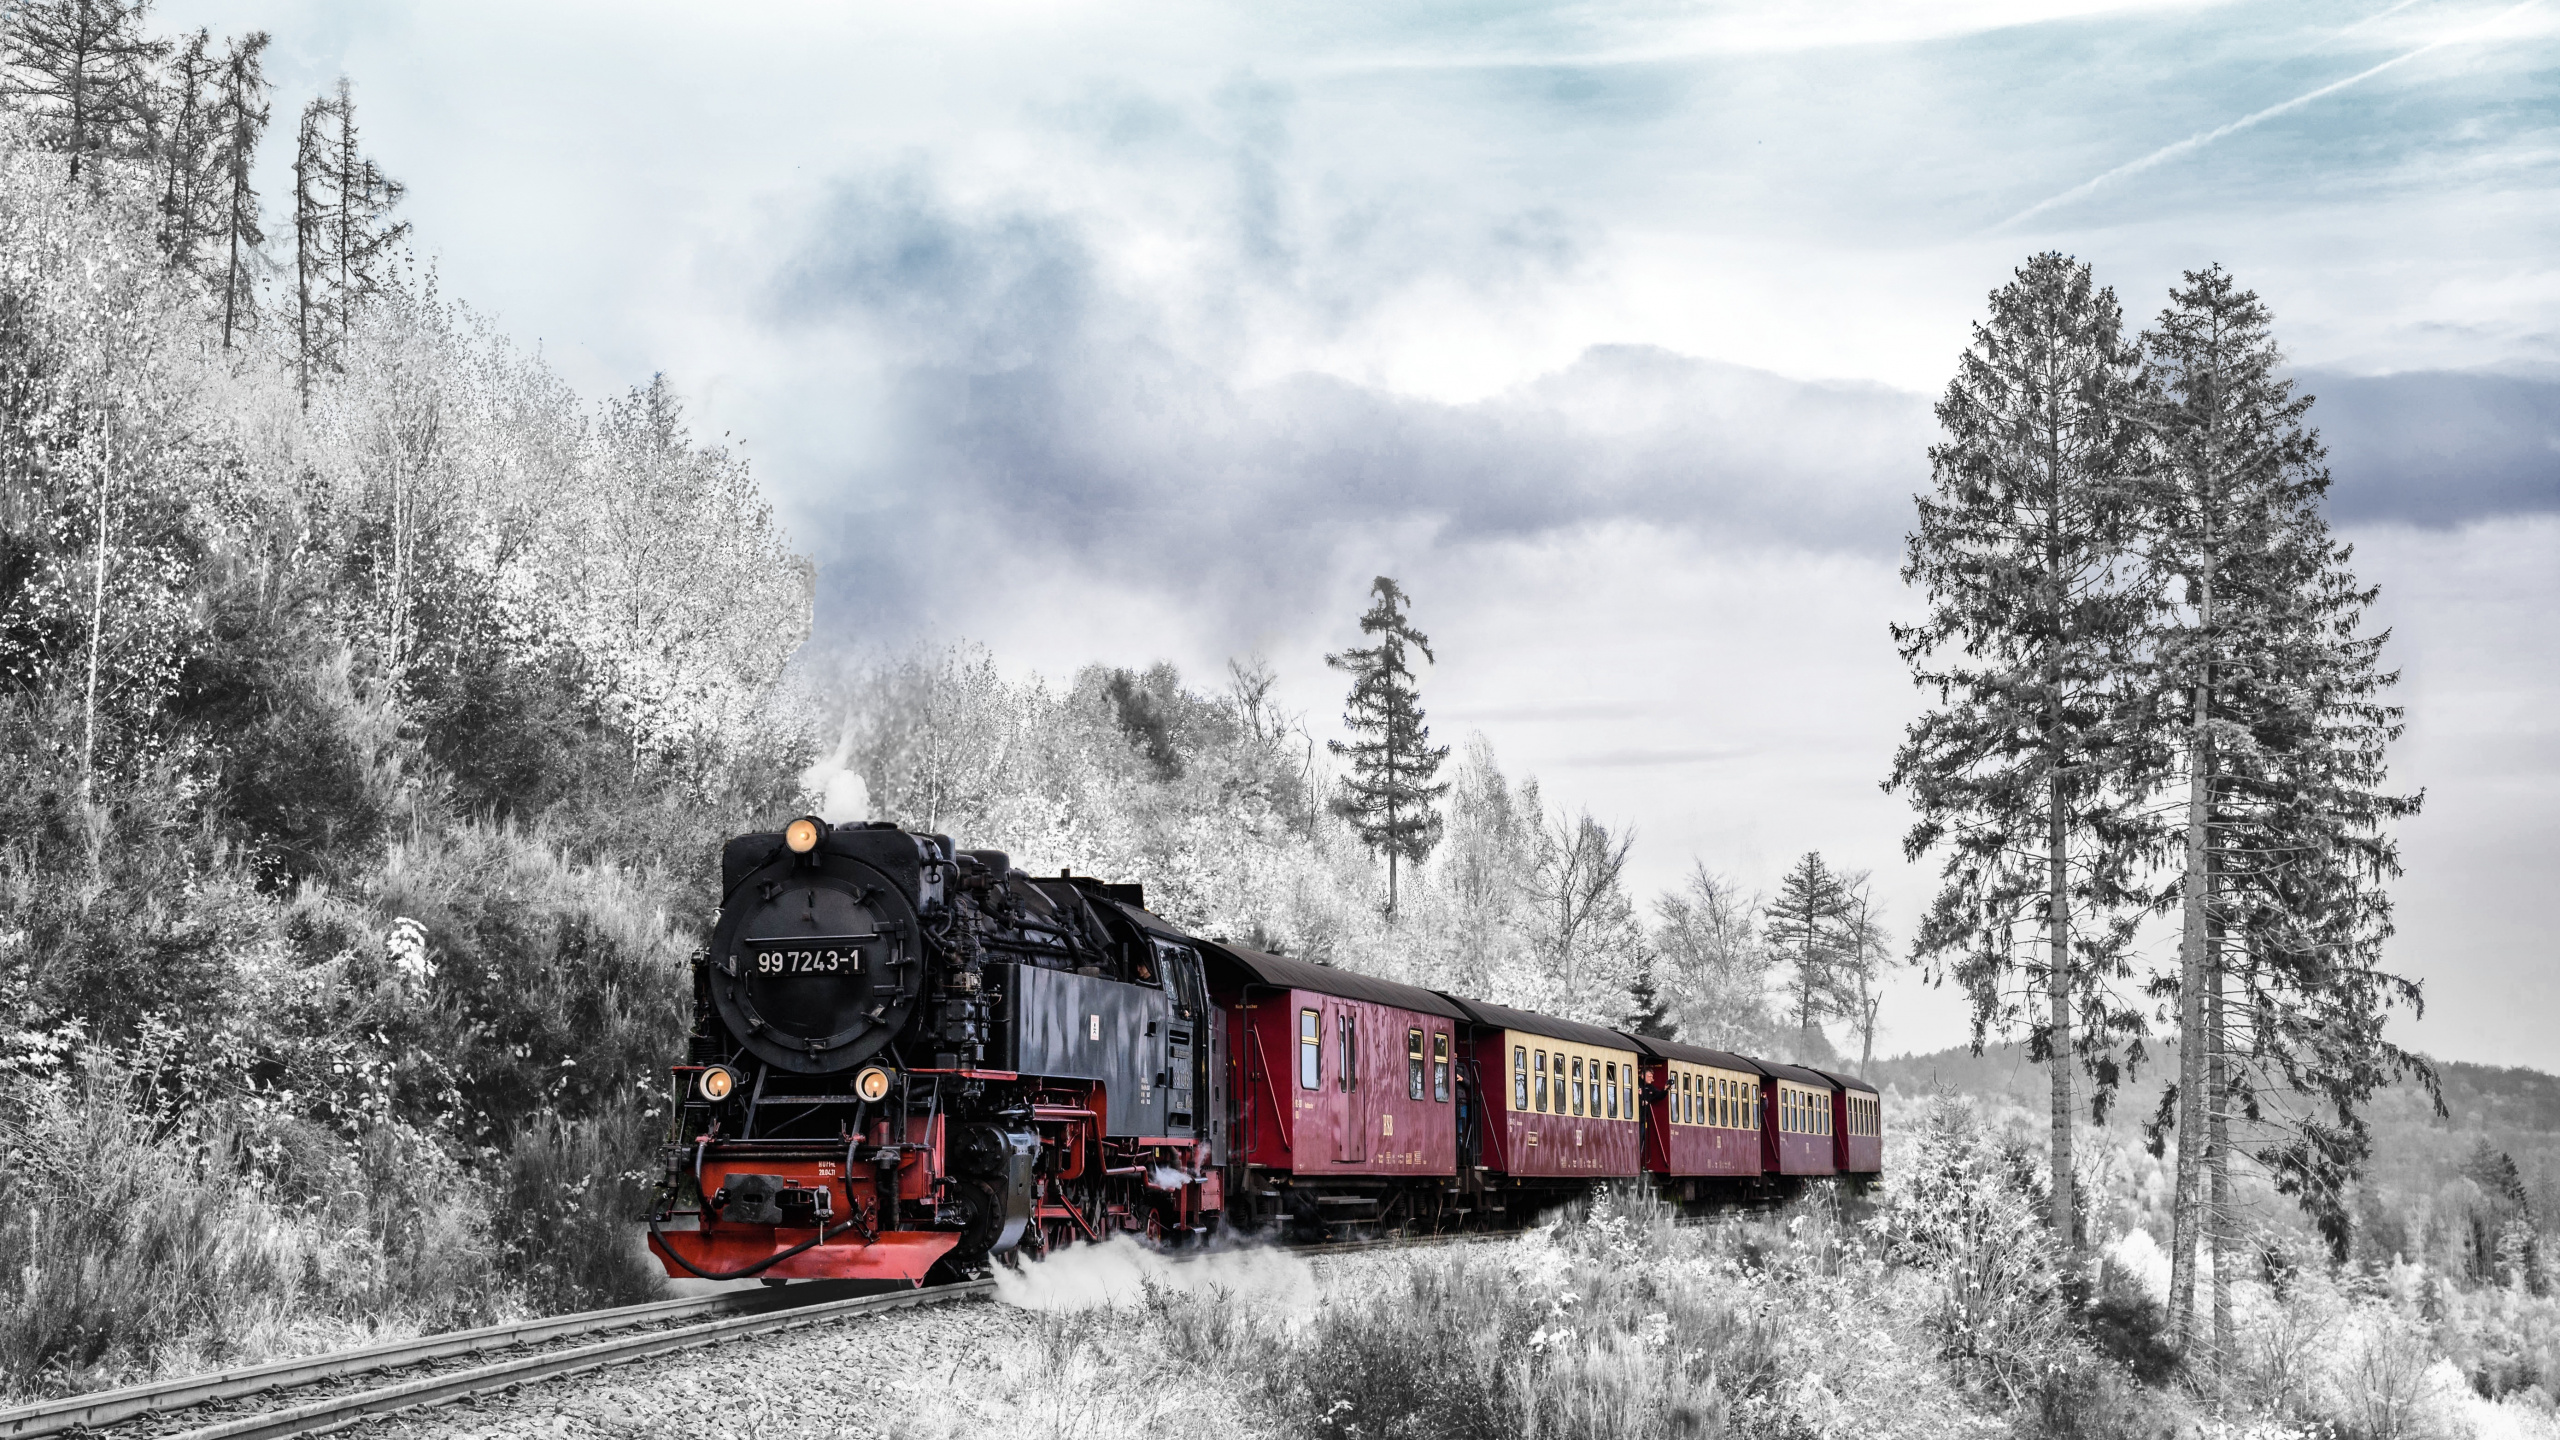 Red and Black Train on Rail Tracks Under Cloudy Sky. Wallpaper in 2560x1440 Resolution